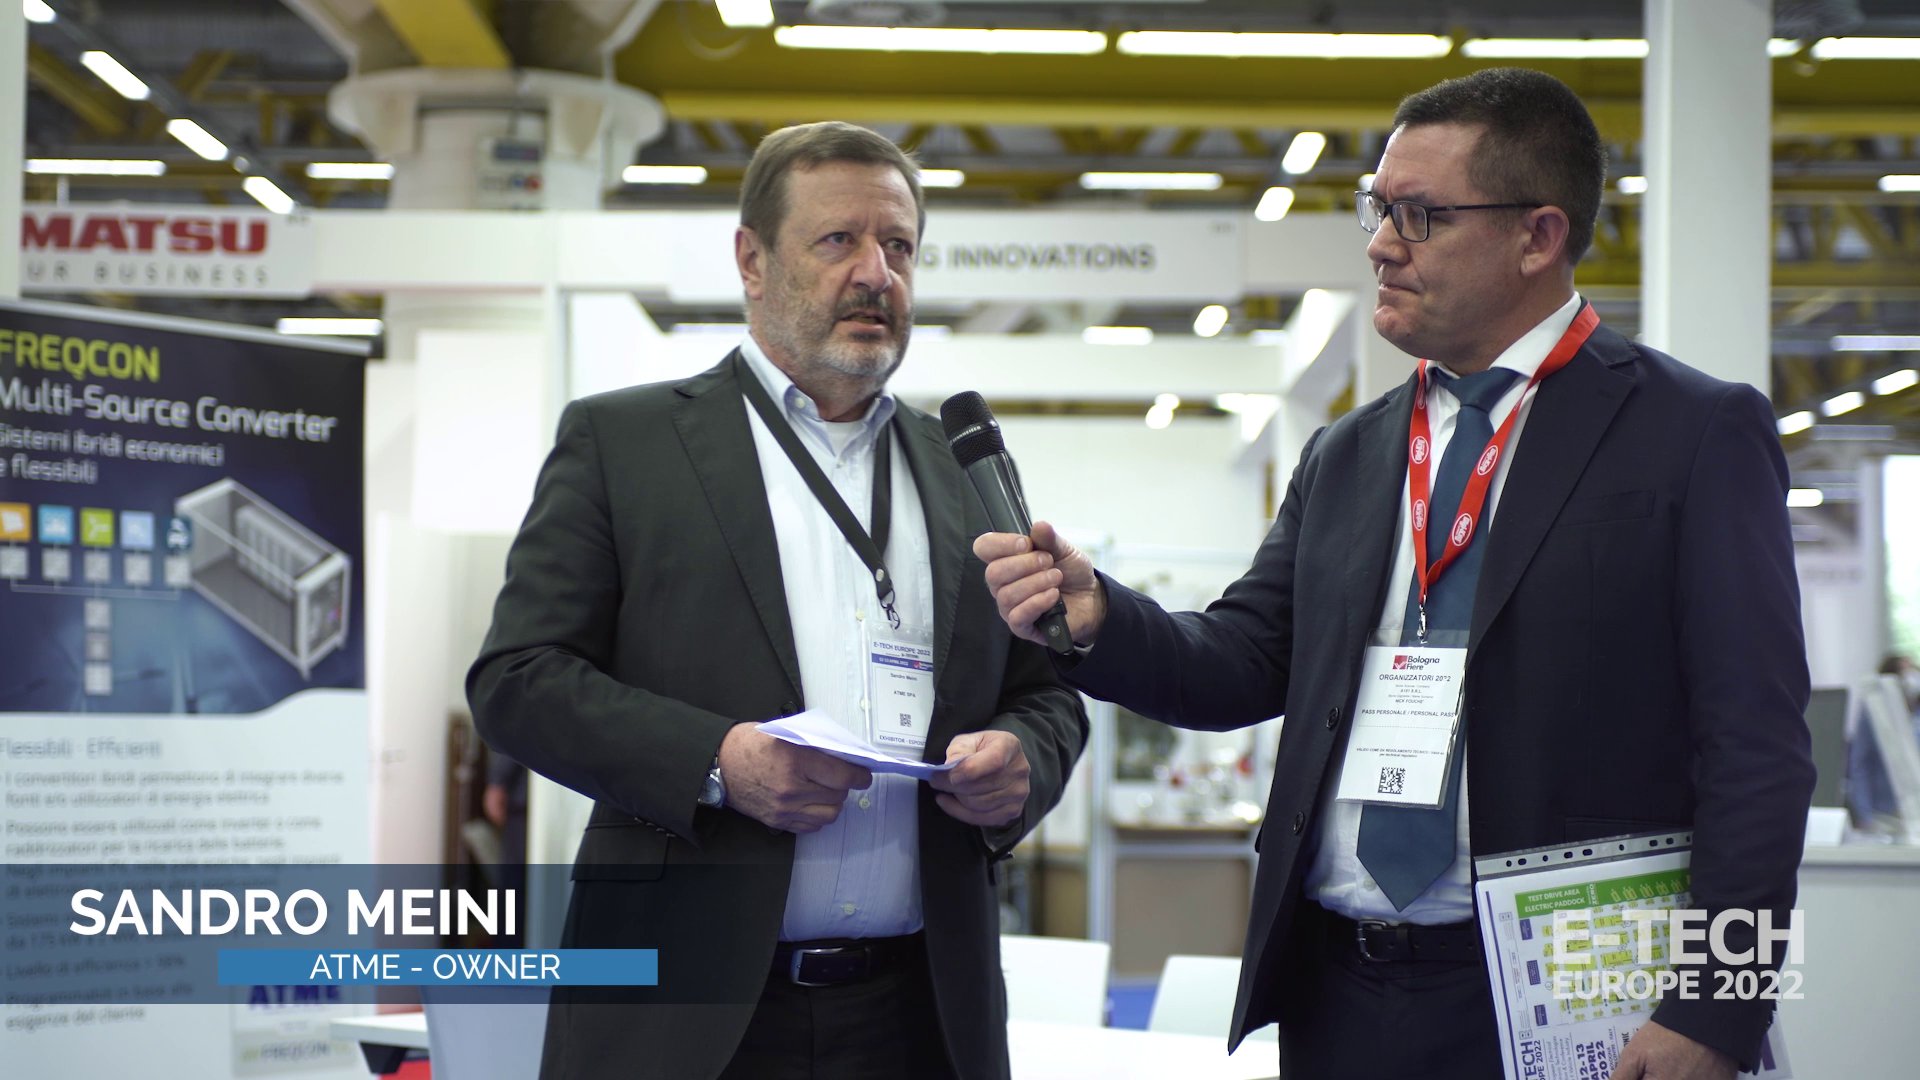 Video interview with Sandro Meini, OWNER of ATME